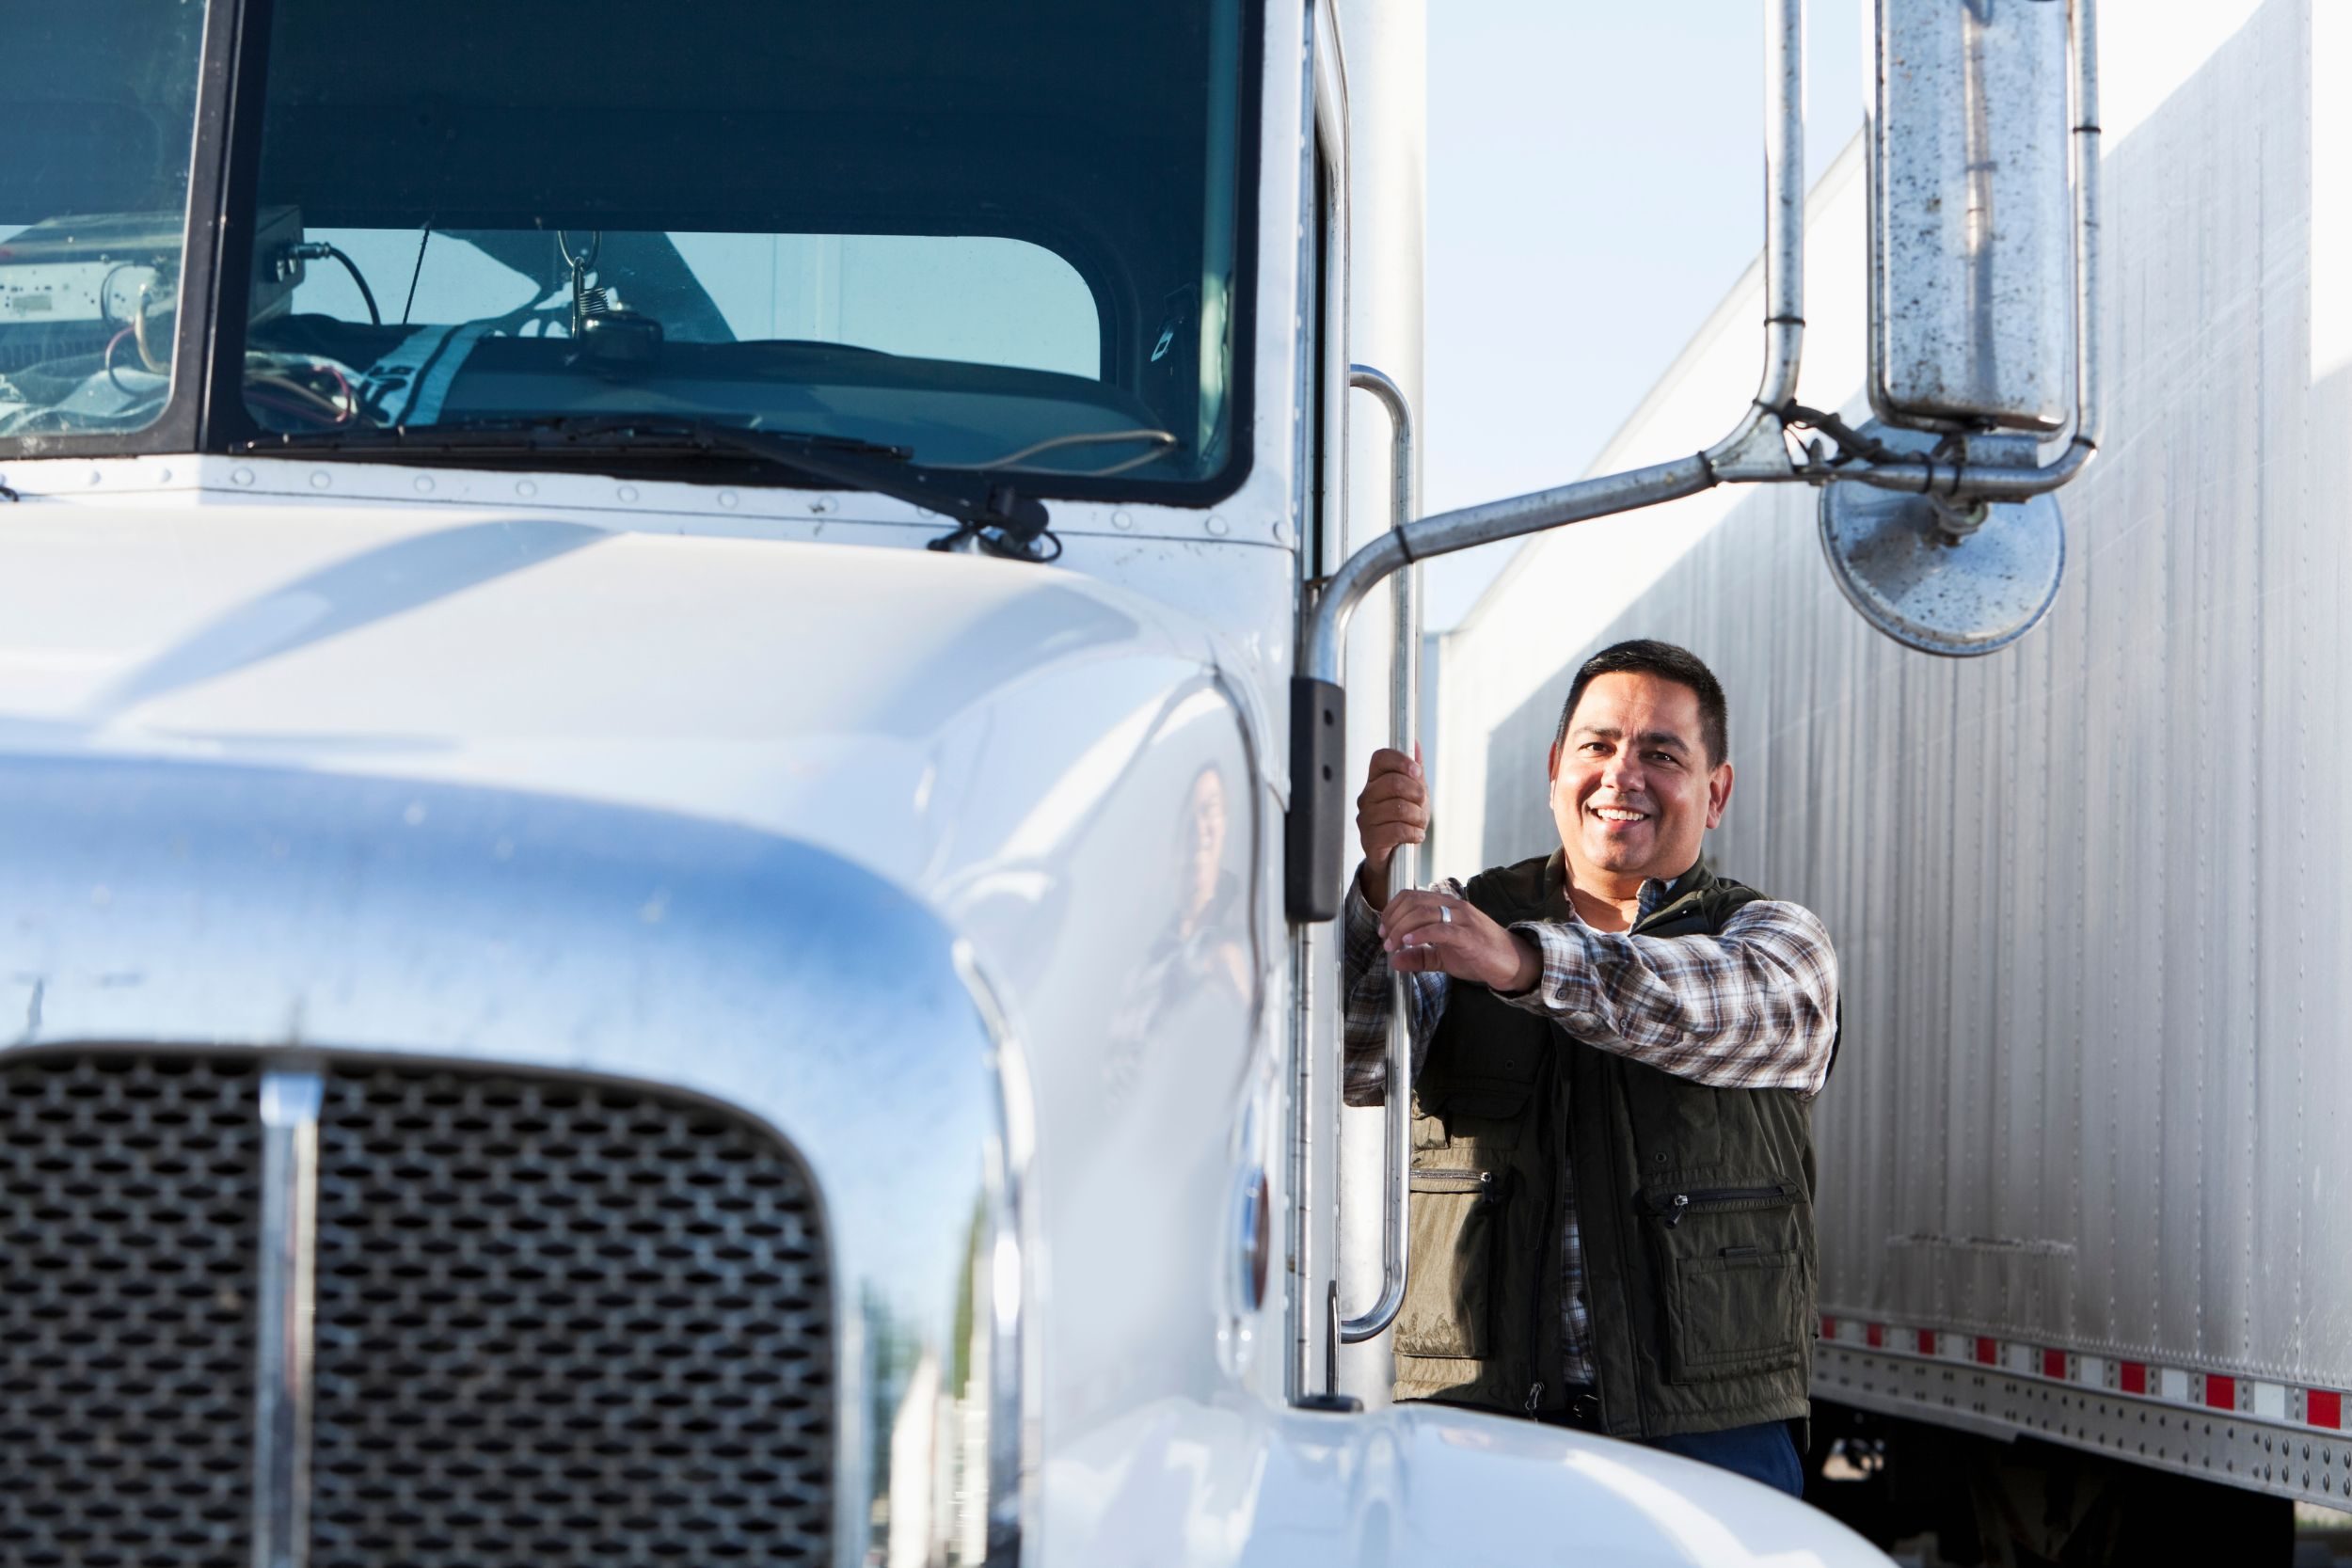 A truck driver holding on to the side of his truck and smiling at the camera